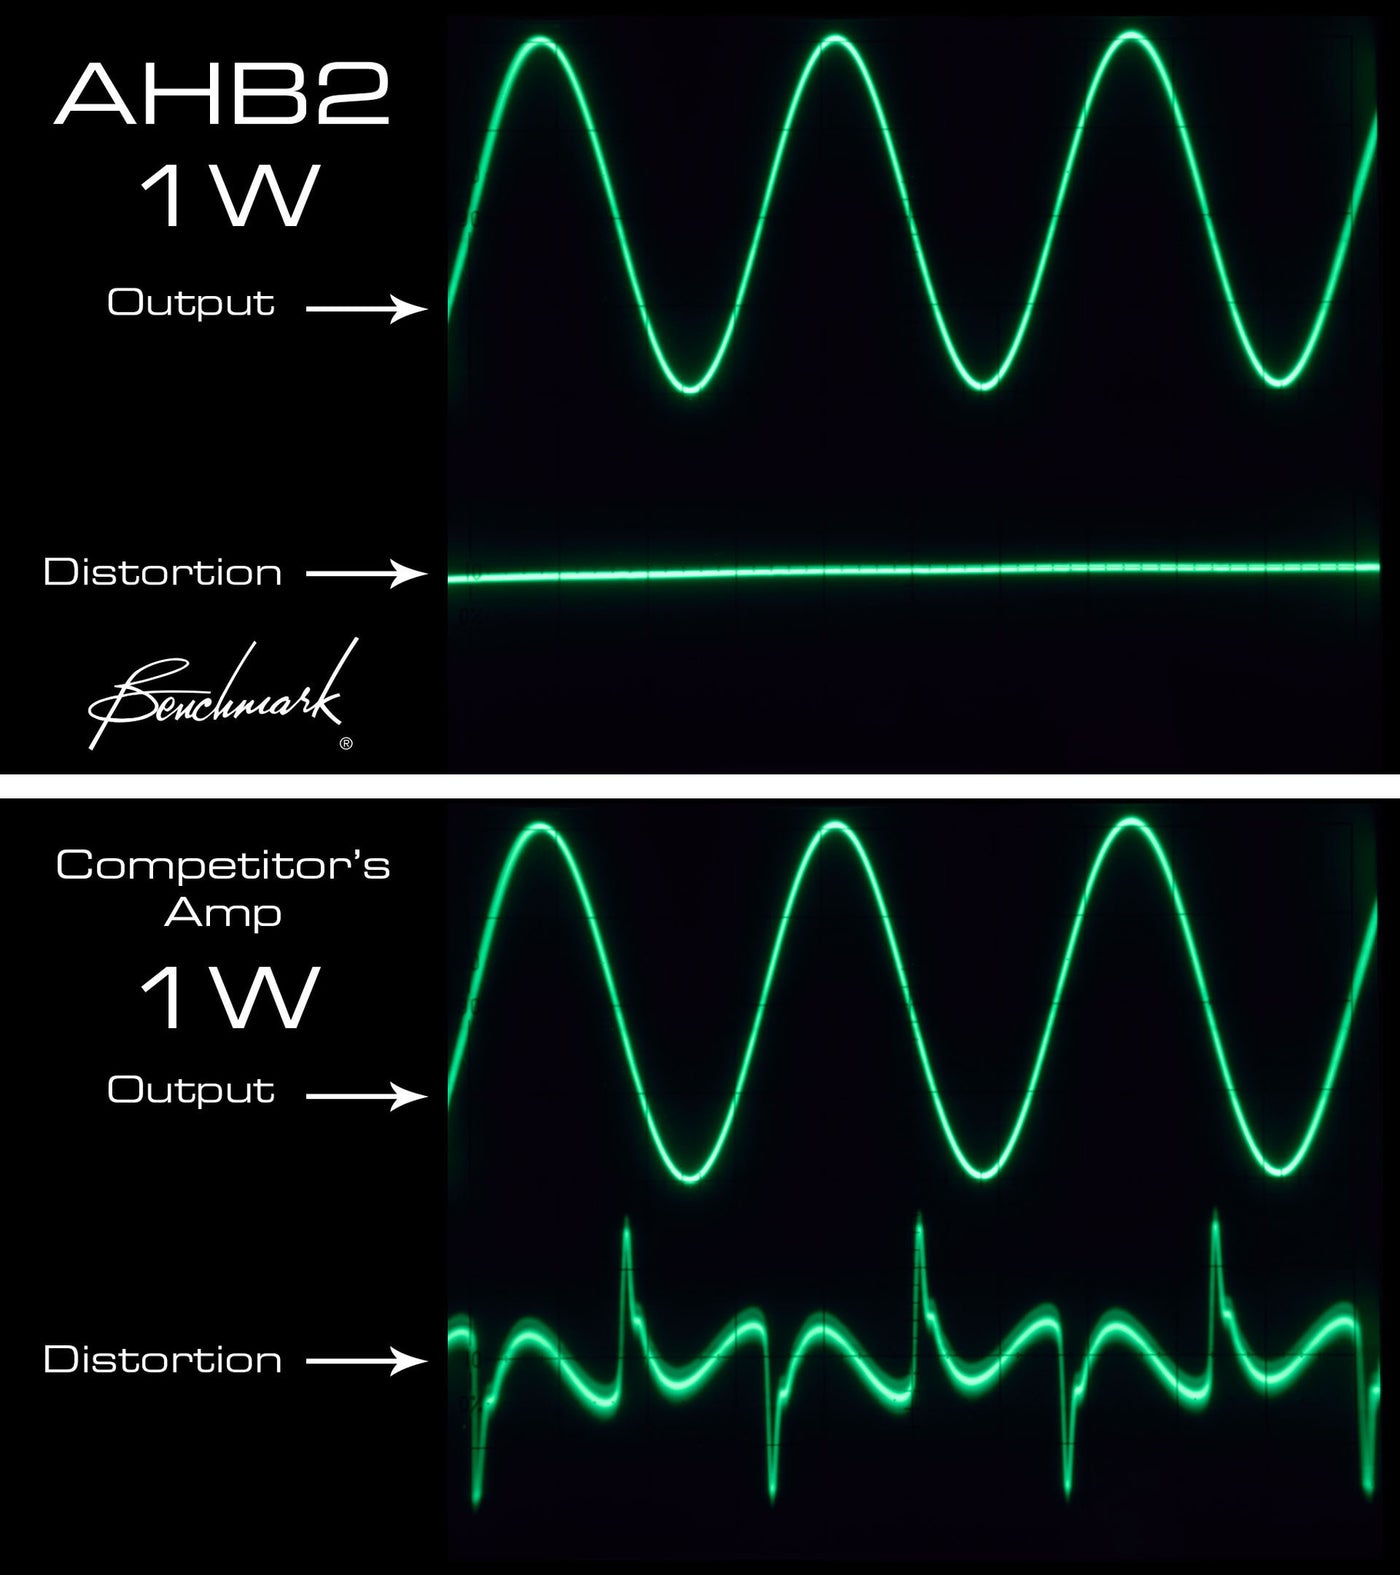 AHB2 vs competitor amp output and distortion